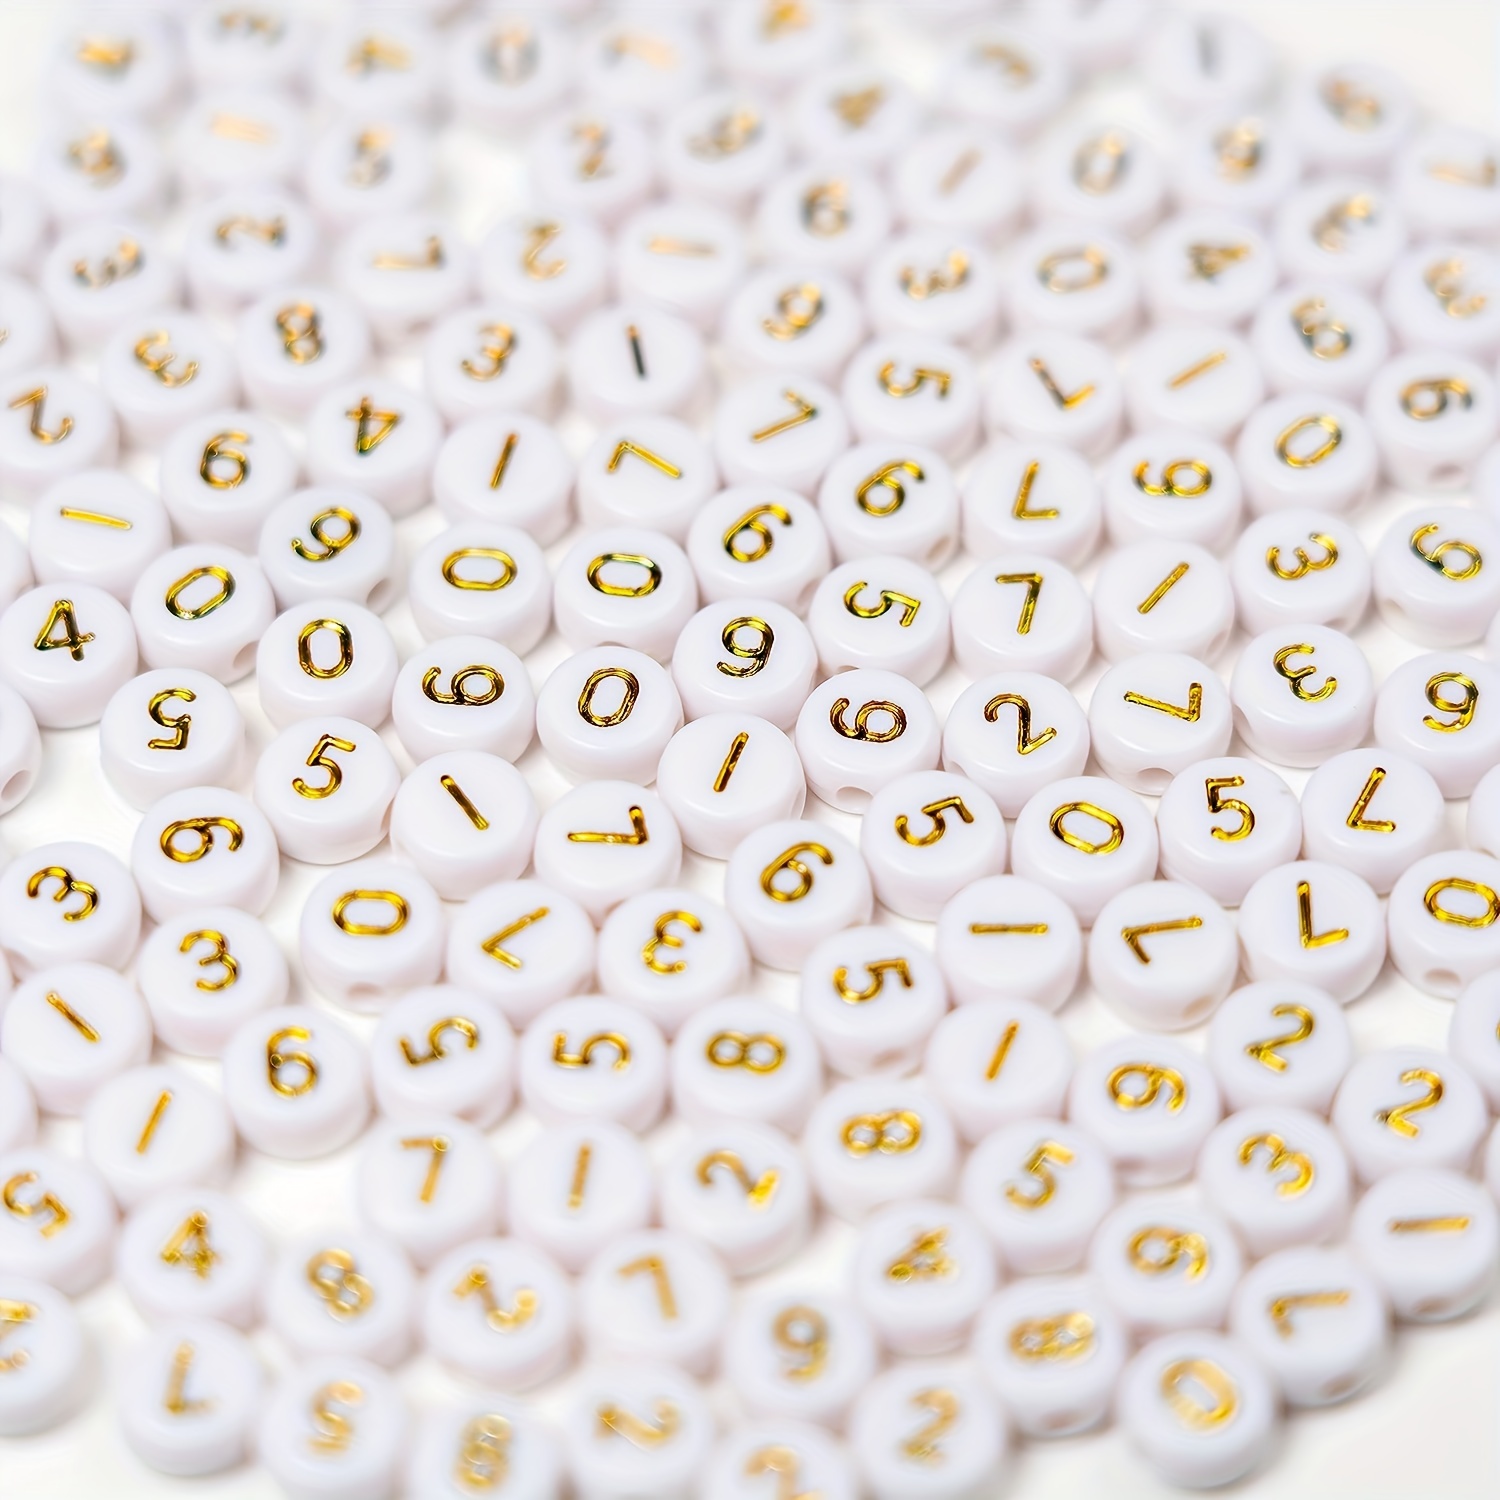 1000Pcs Acrylic Number Beads For DIY Necklaces Key Chains Bracelets (4x7  Round, White) Send A Roll Of Thread For Small Business Jewelry Making  Supplie